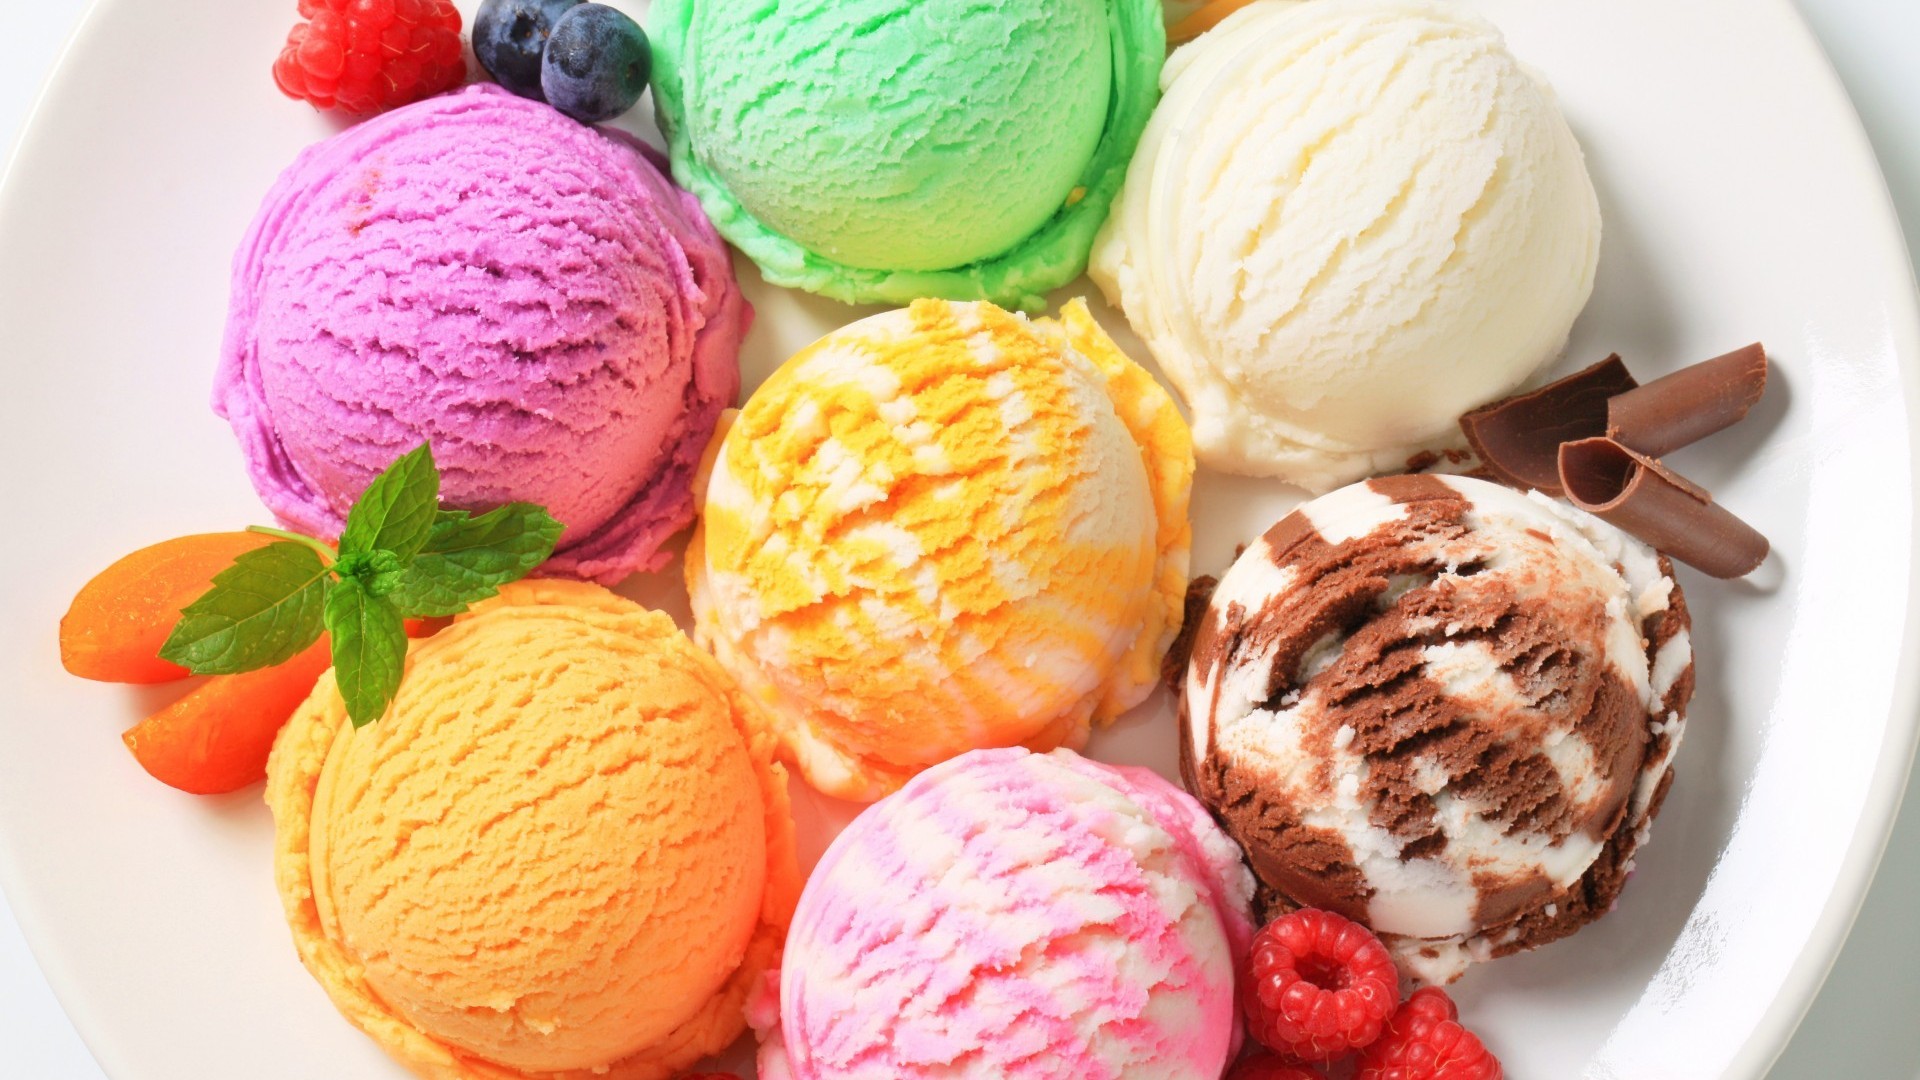 Wallpaper HD Cute Ice Cream With high-resolution 1920X1080 pixel. You can use this wallpaper for your Desktop Computer Backgrounds, Mac Wallpapers, Android Lock screen or iPhone Screensavers and another smartphone device